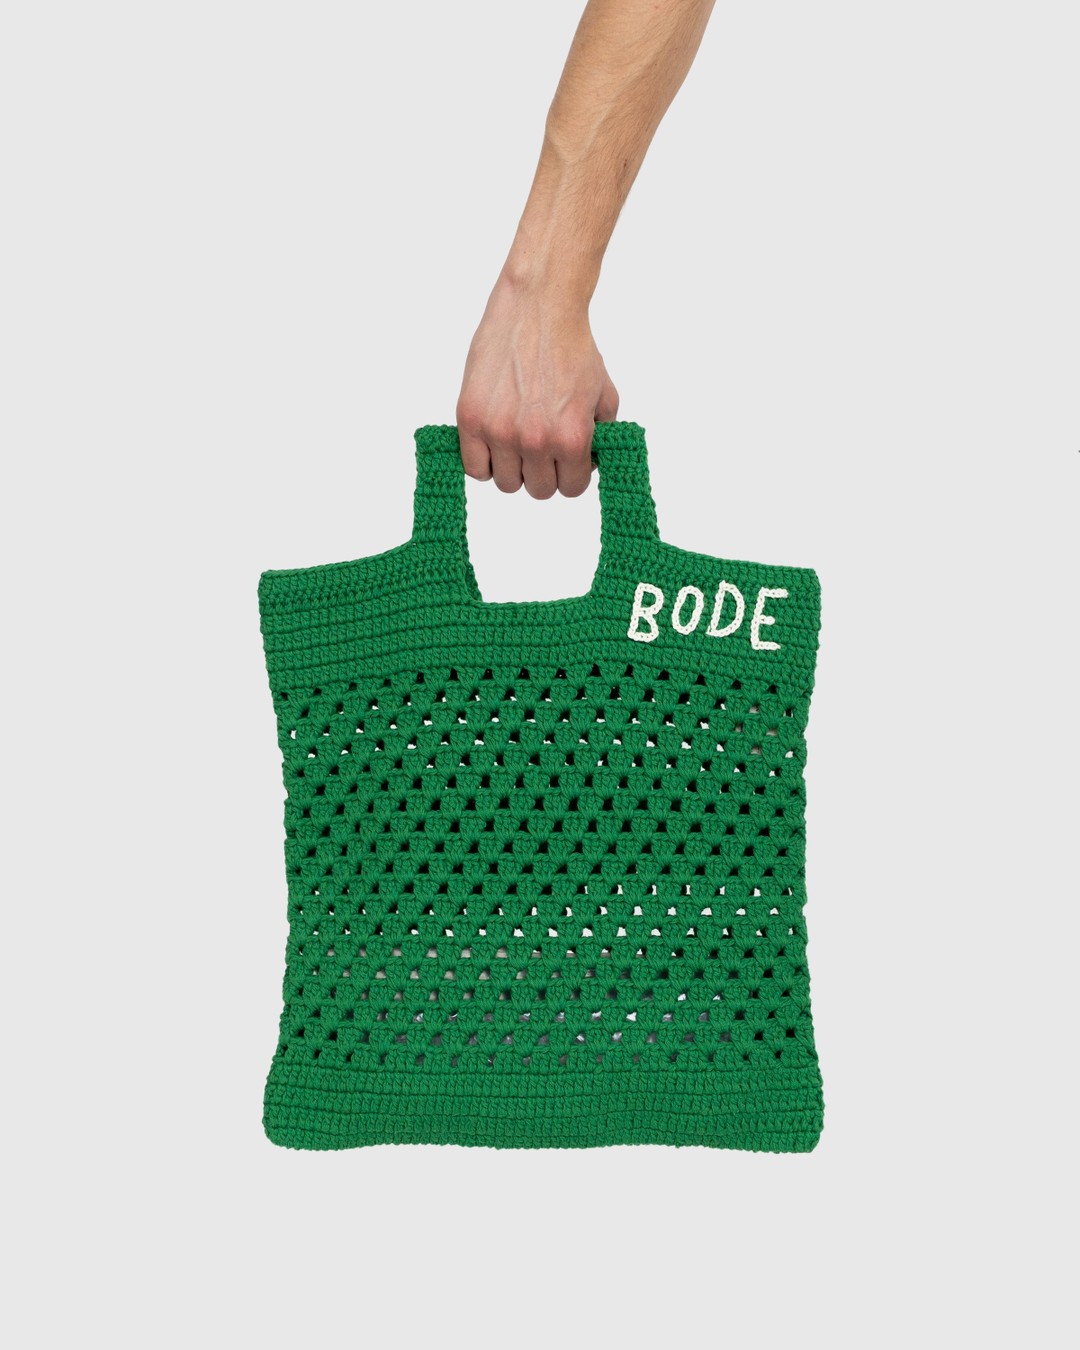 Bode – Crochet Tote Green - Tote Bags - Green - Image 3